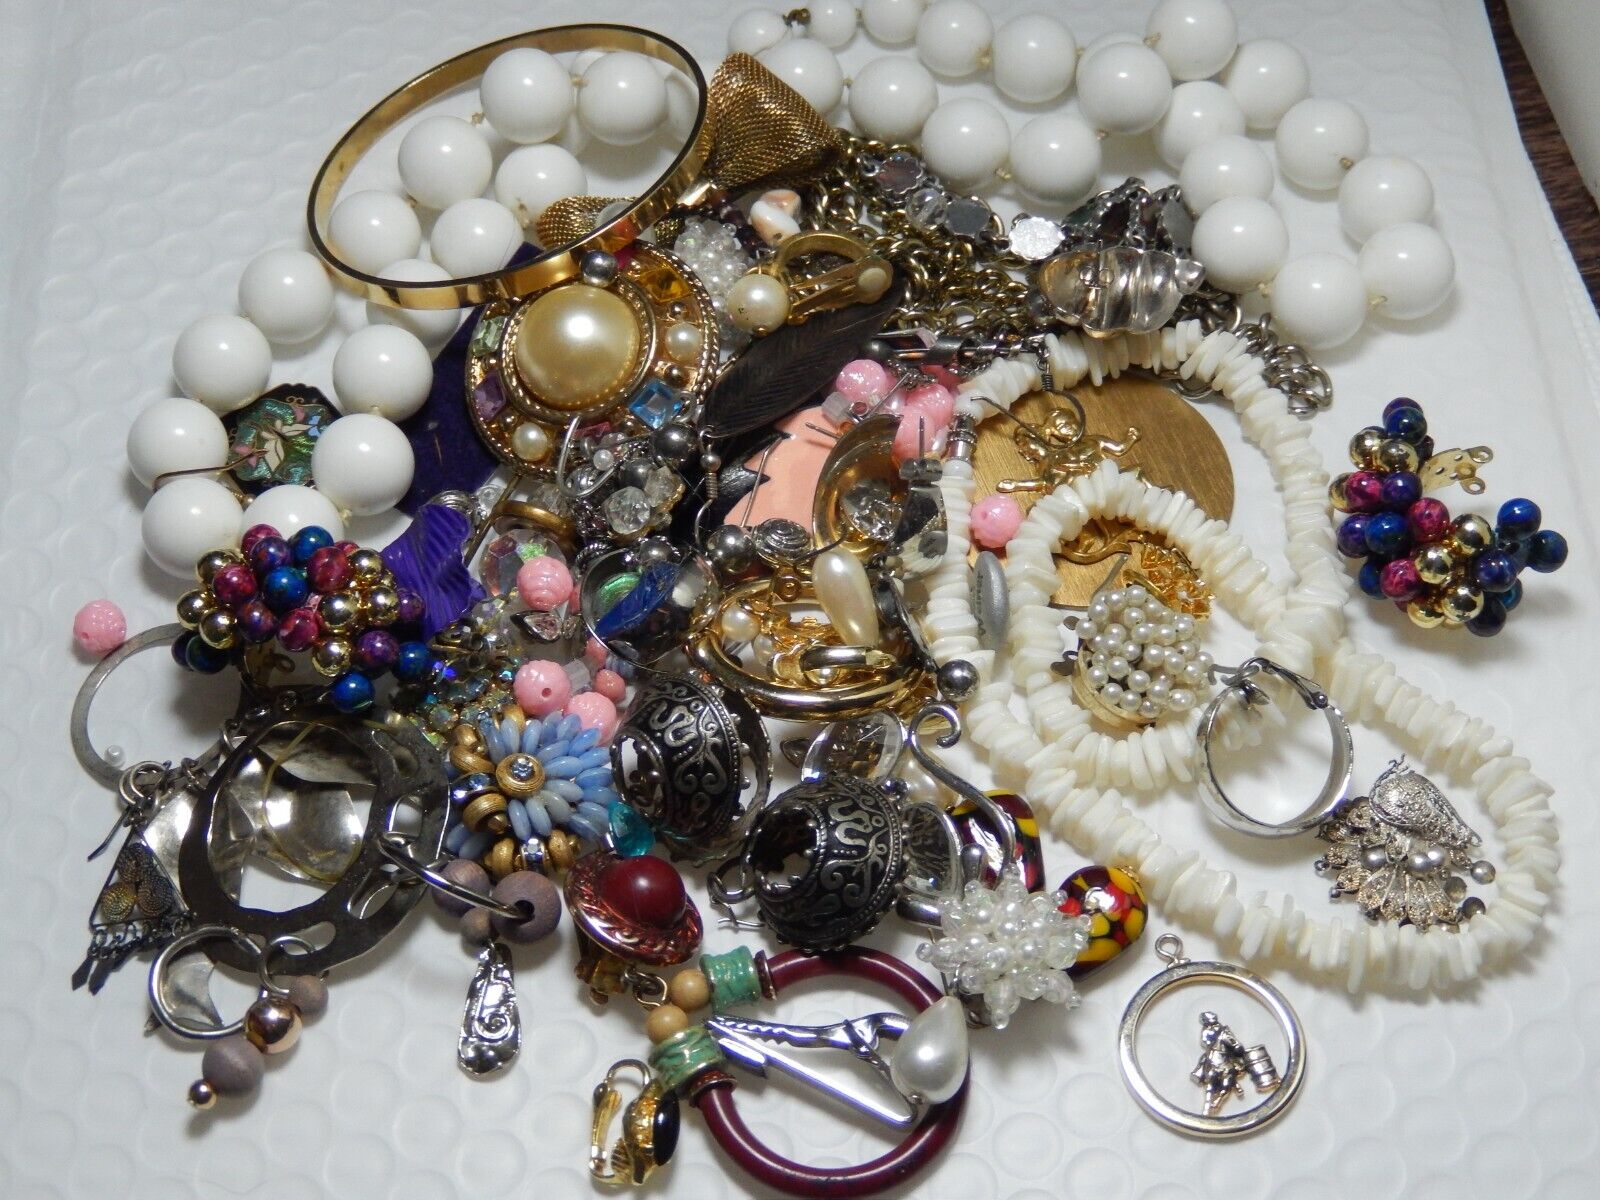 Costume Jewelry Lot For Crafting Over 50 pieces Assortment Sold as is Unbranded